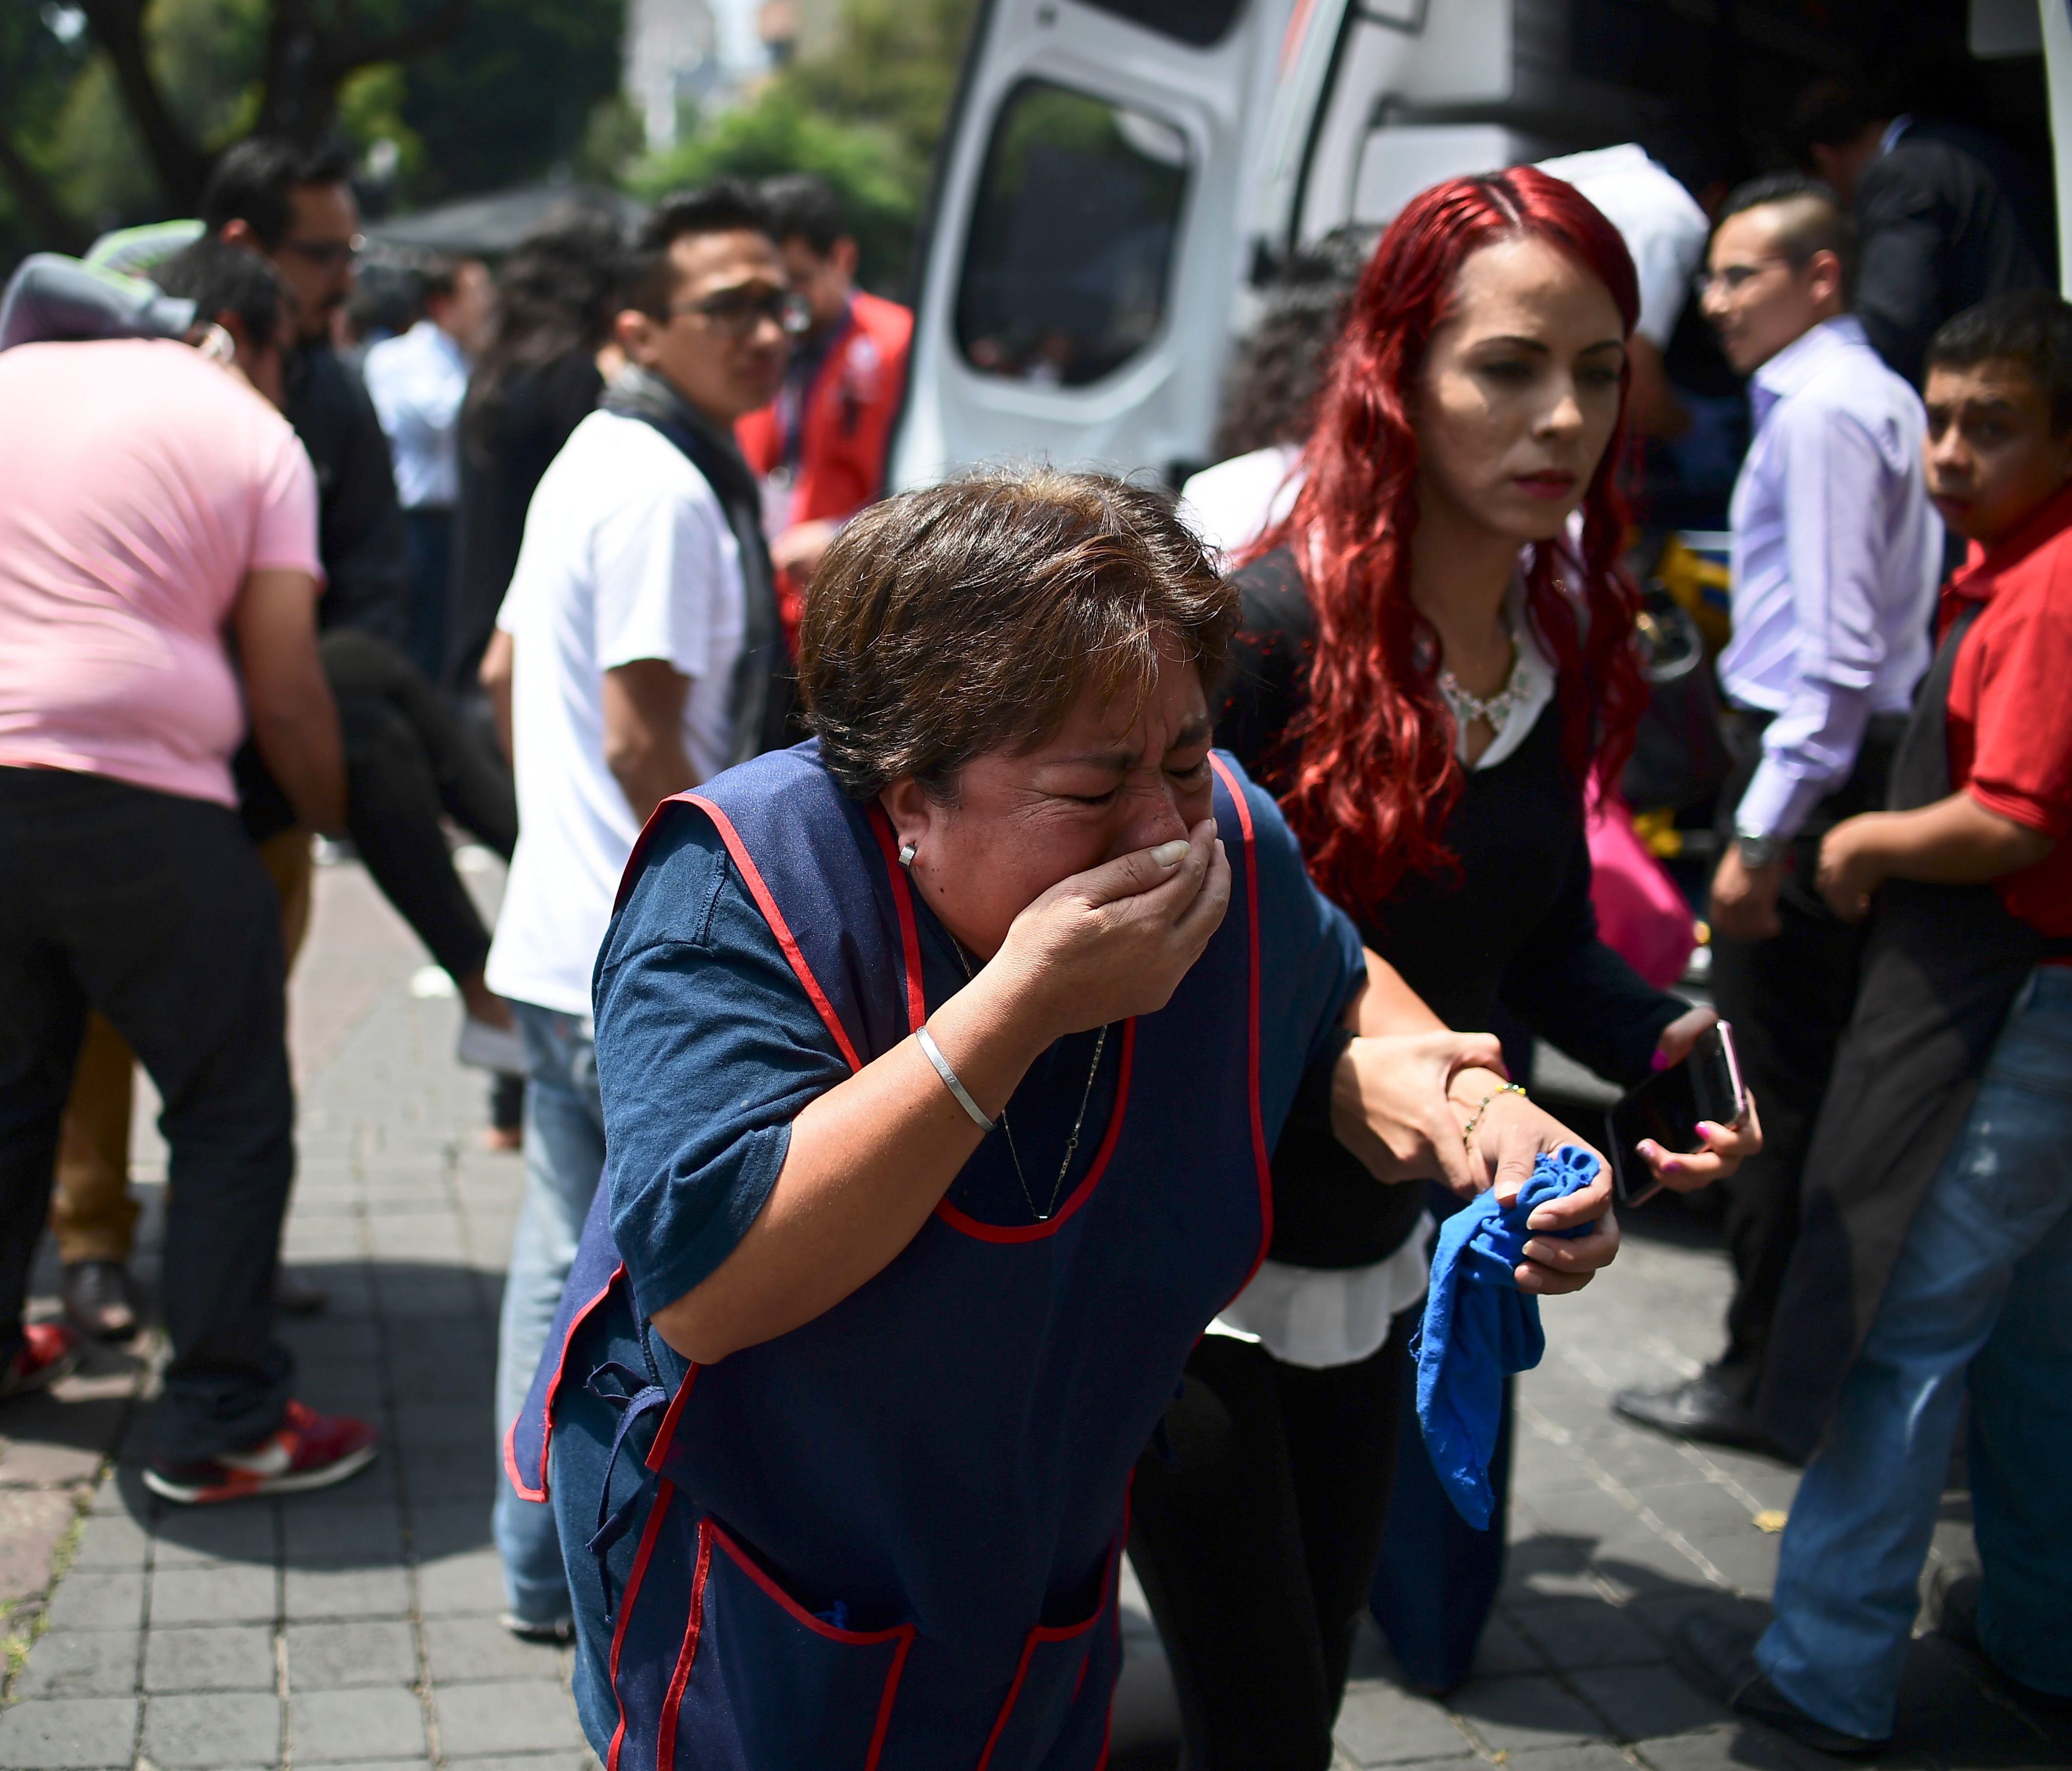 People react after a real quake rattled Mexico City on Sept. 19, 2017 moments after an earthquake drill was held in the capital.